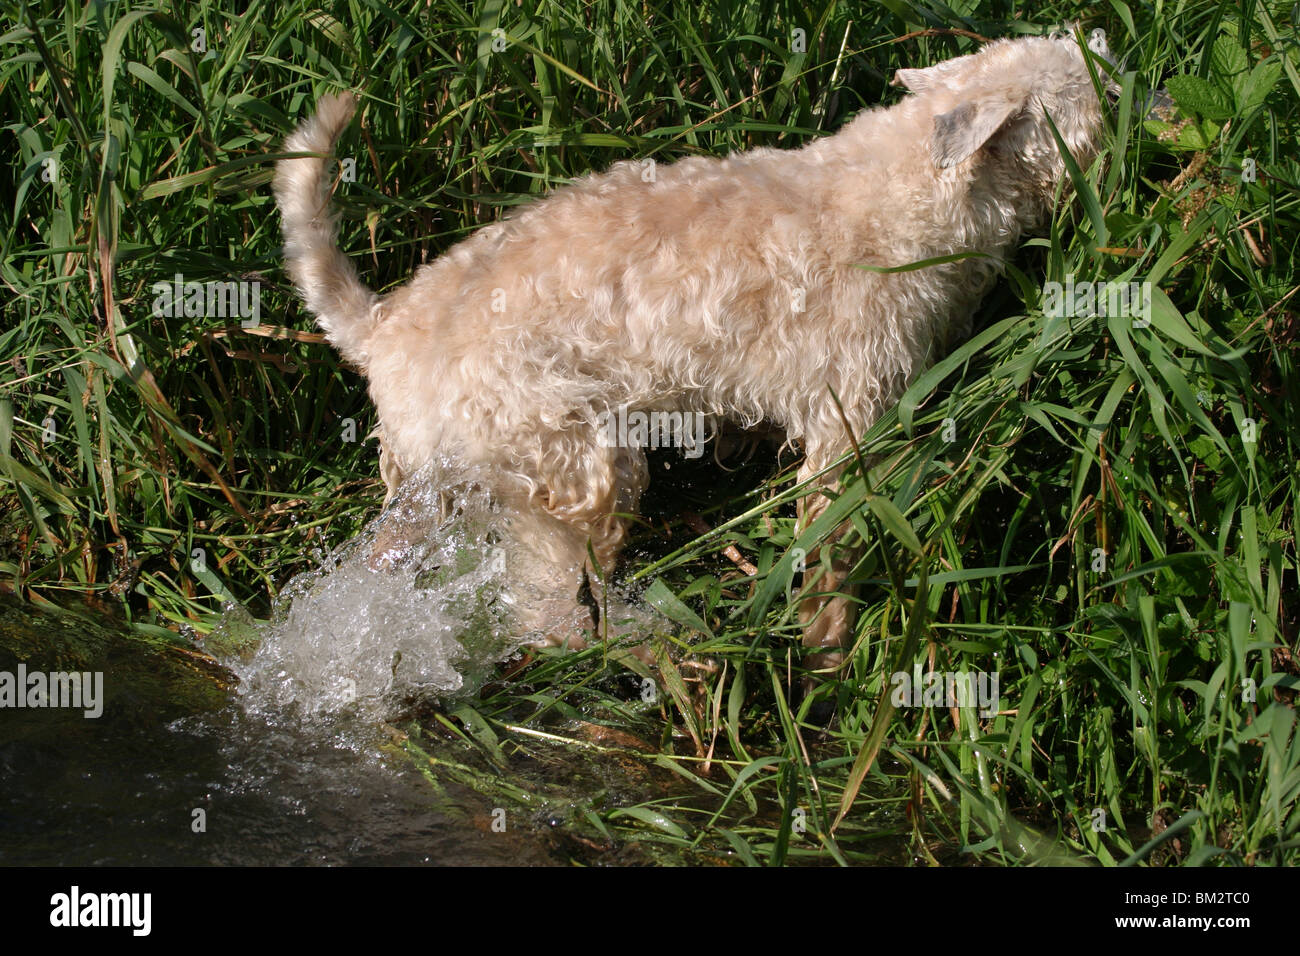 Irish Soft Coated Wheaten Terrier Banque D'Images